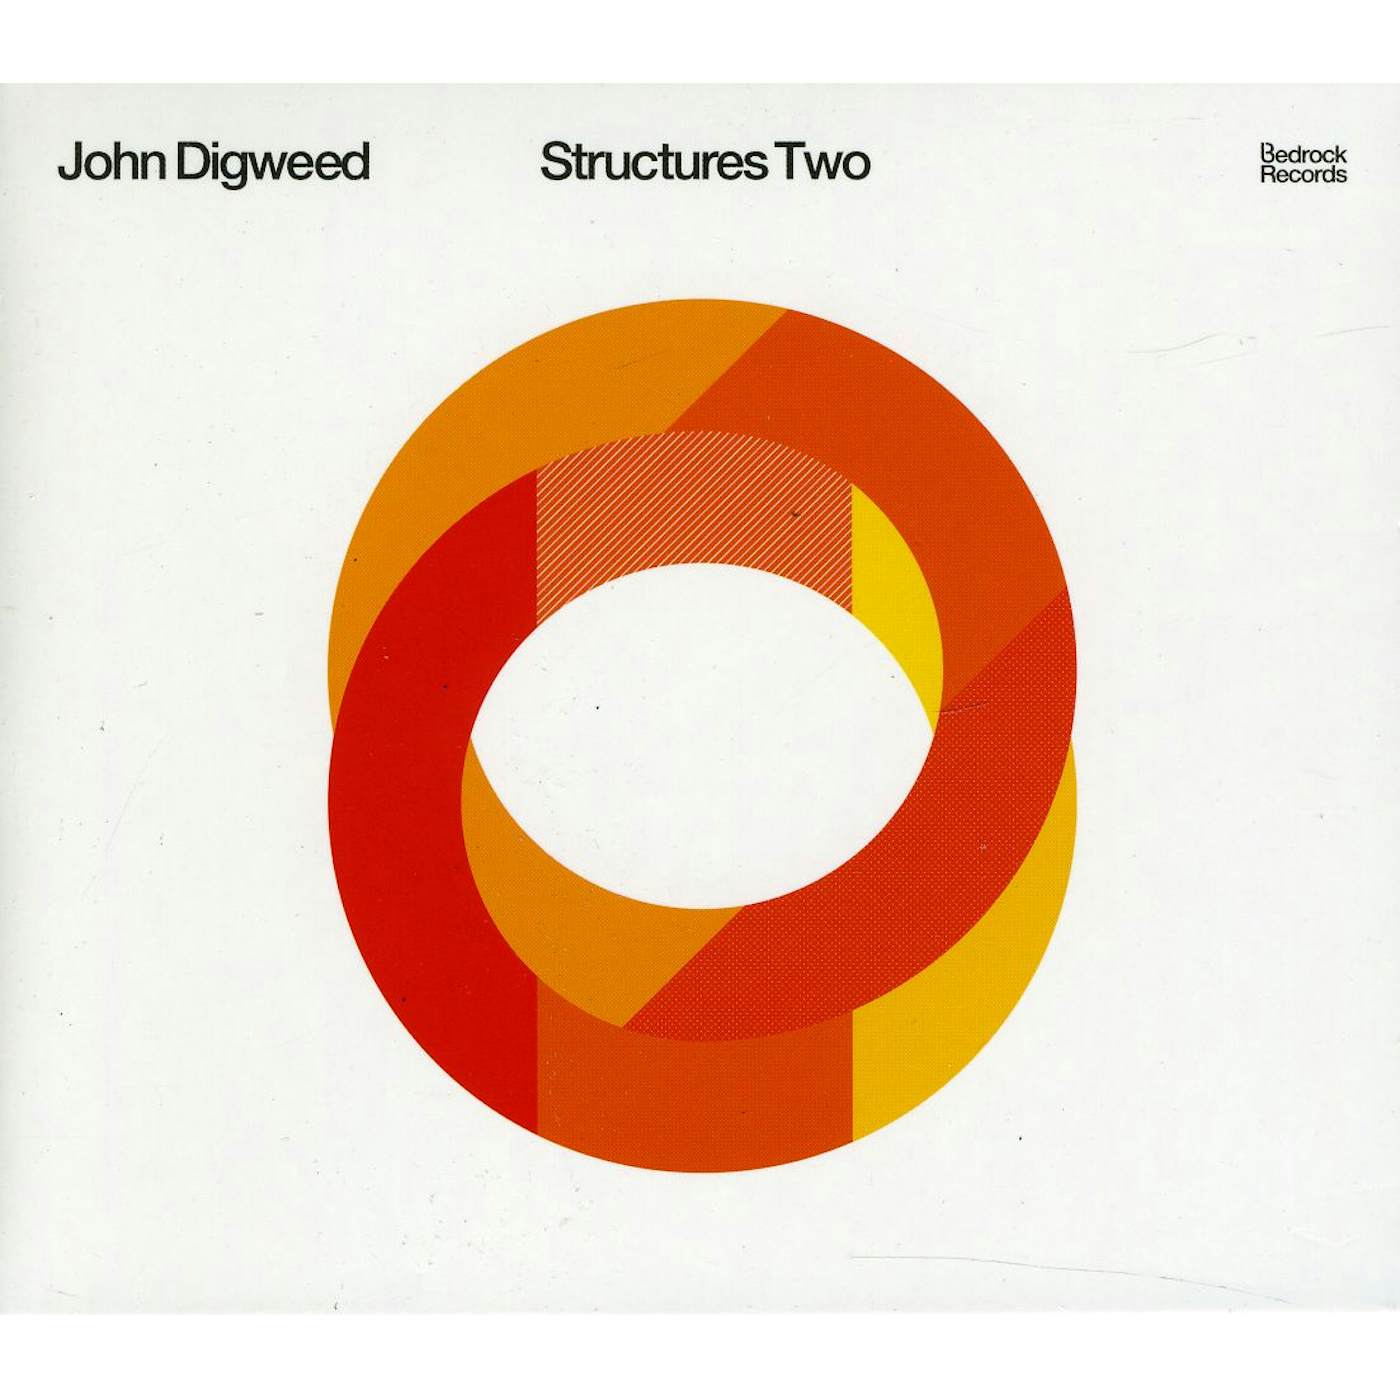 John Digweed STRUCTURES 2 CD